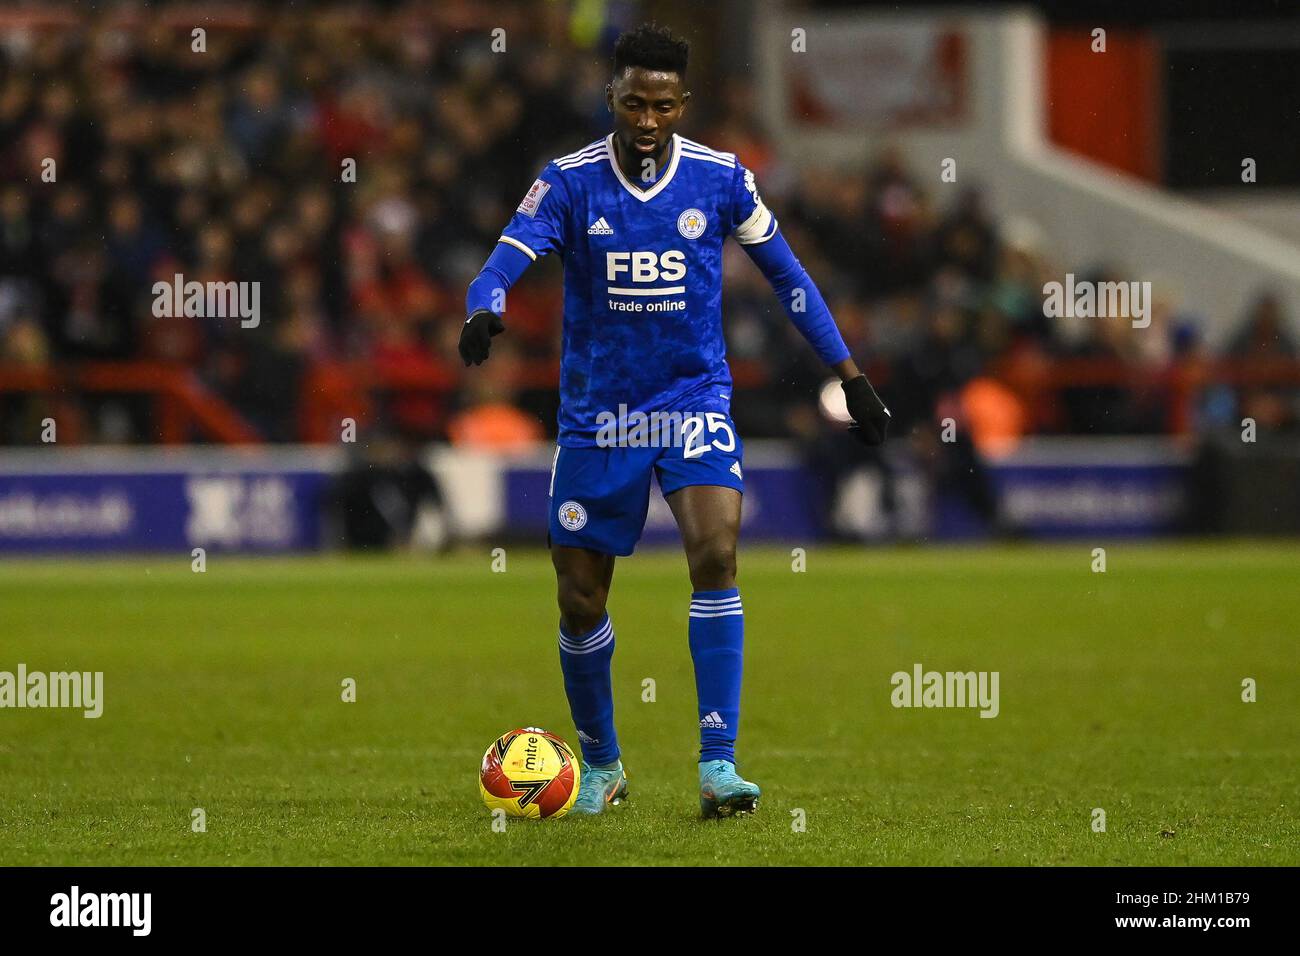 Wilfred Ndidi #25 of Leicester City during the game in, on 2/6/2022. (Photo by Craig Thomas/News Images/Sipa USA) Credit: Sipa USA/Alamy Live News Stock Photo